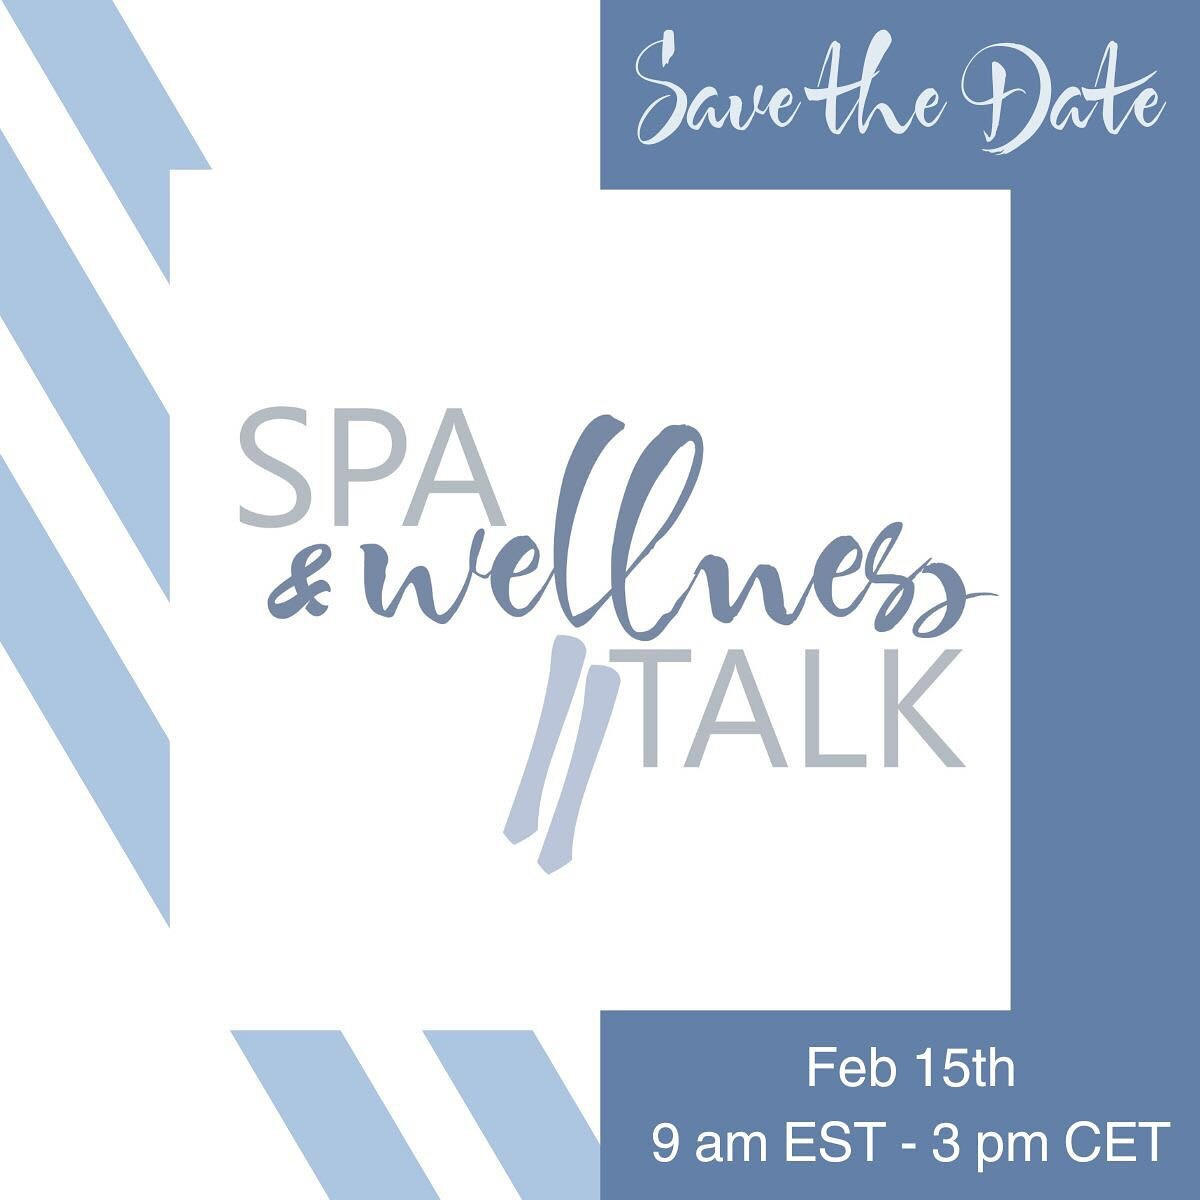 We're kicking off the year with the first Spa &amp; Wellness Talk! I'm thrilled to be joined by Erin Lee, CEO and Founder of the Touchless Wellness Association, for this exciting discussion. Register now using the link in our bio and come prepared wi